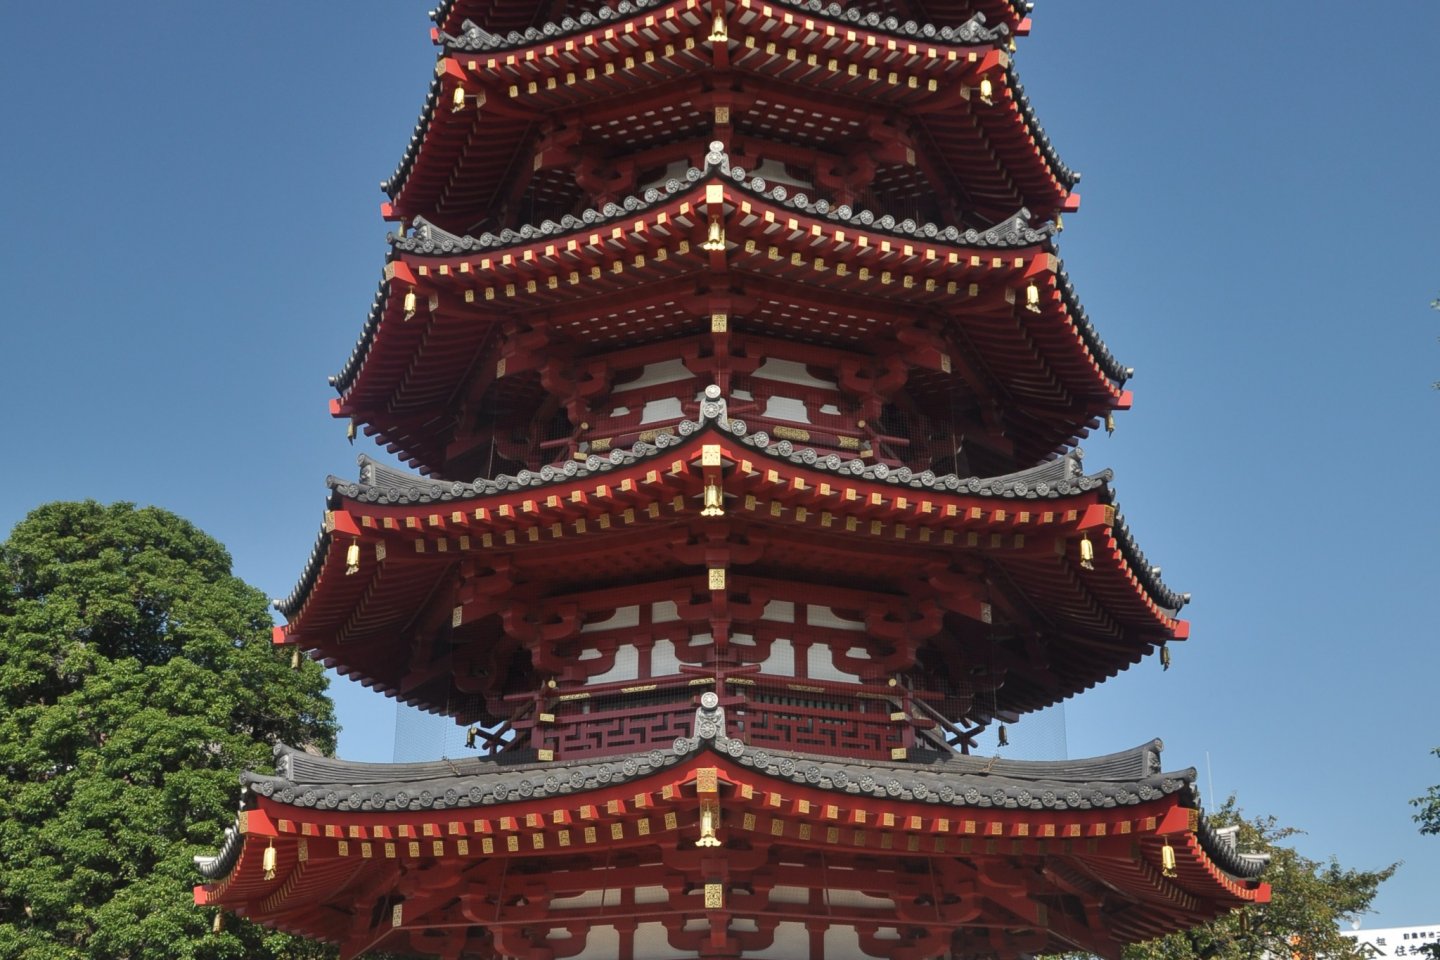 An imposing pagoda amid other majestic buildings